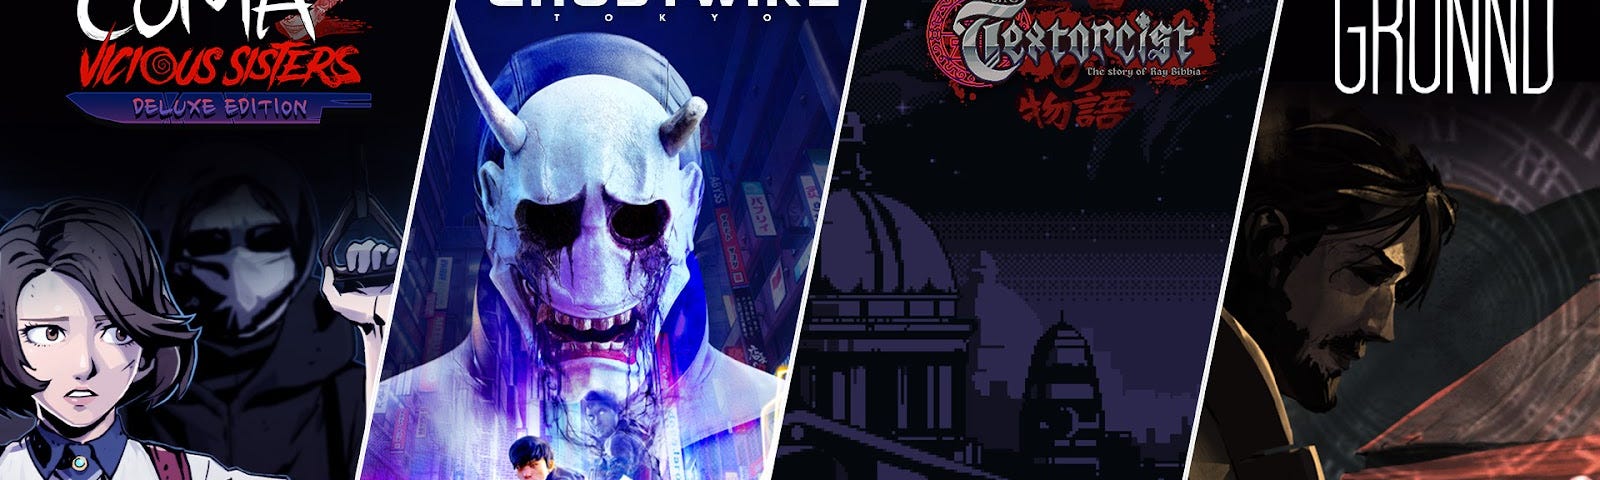 Prime Gaming October Content Update: Ghostwire: Tokyo, GRUNND, Content for  Dead by Daylight, Diablo IV and More, by Chris Leggett